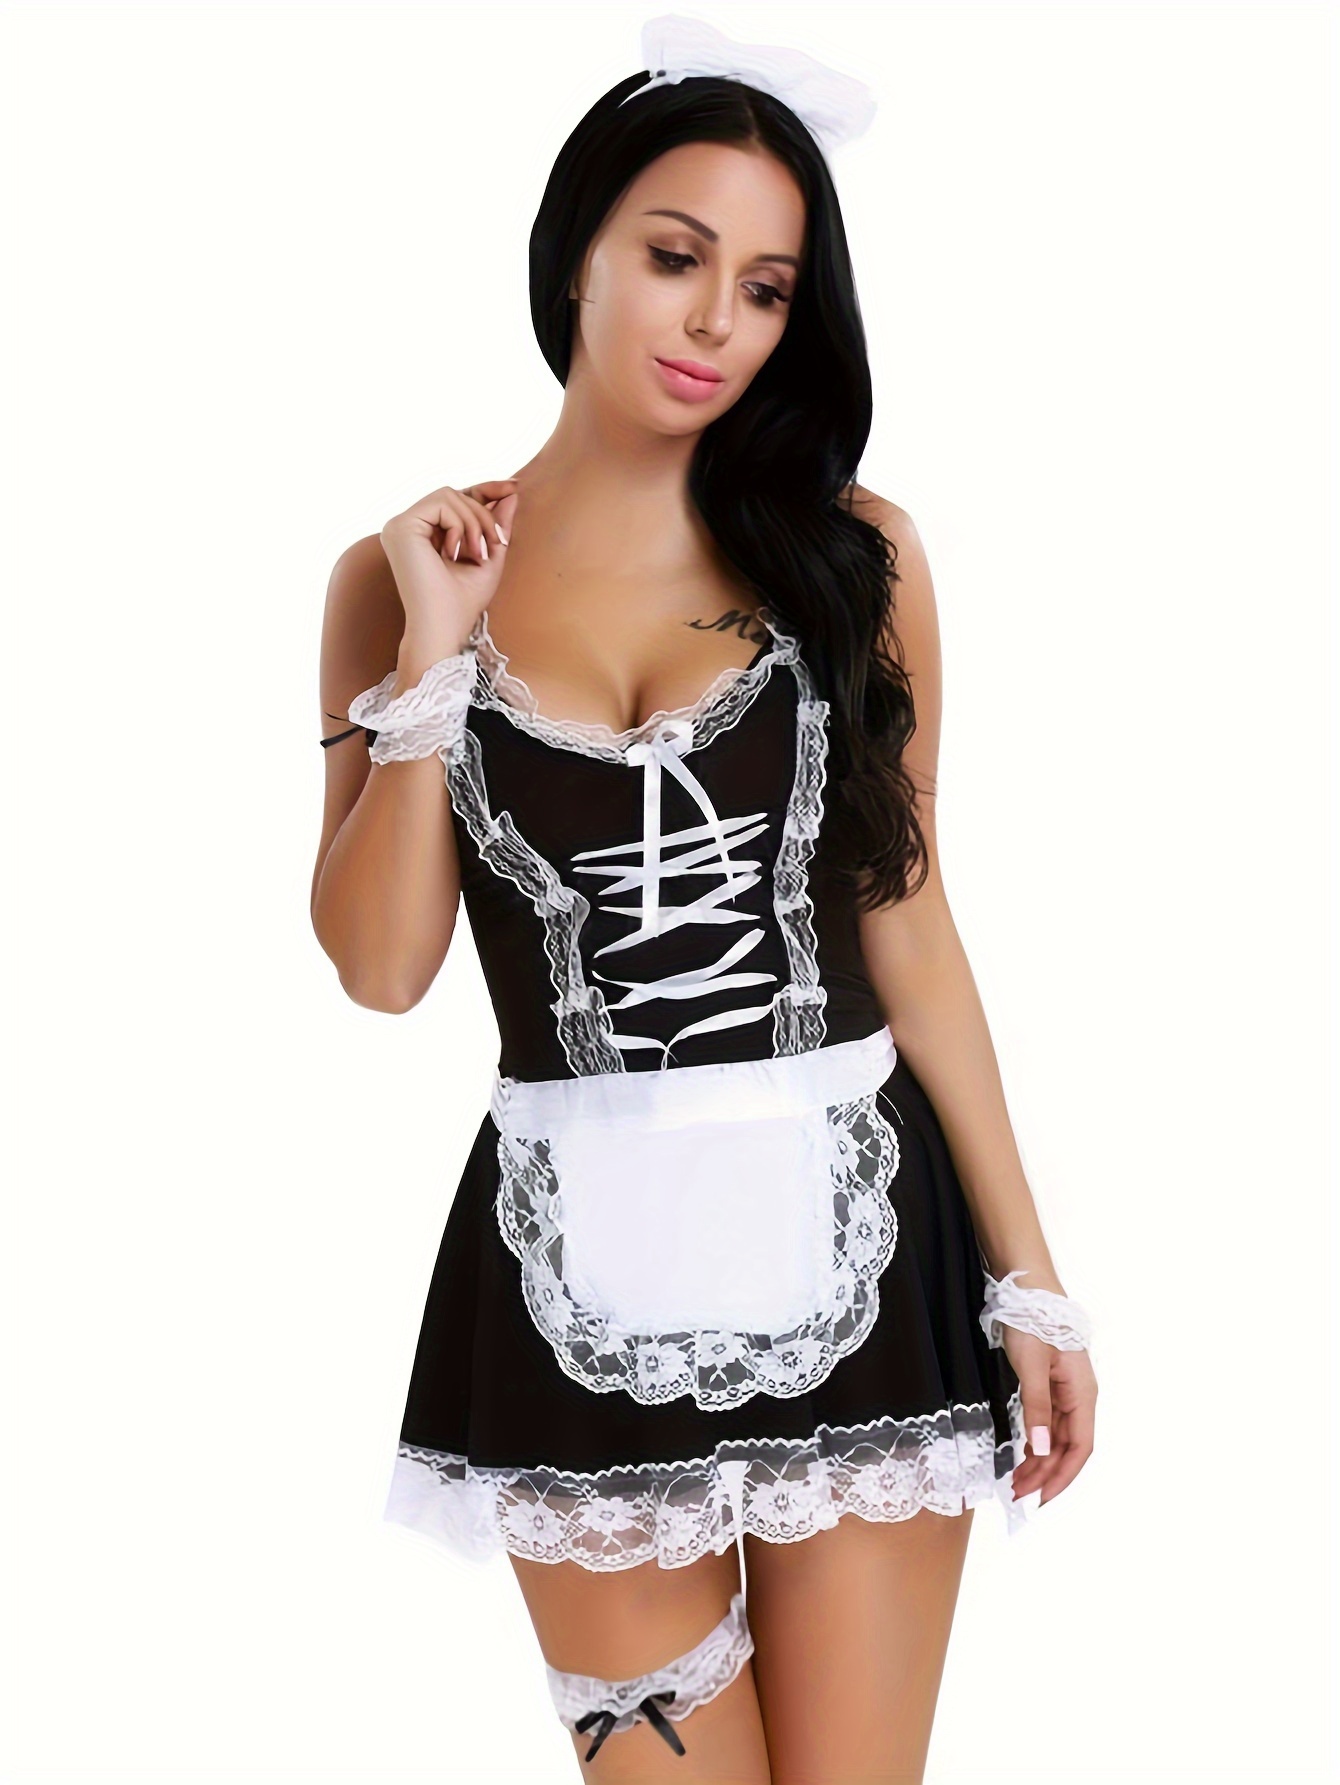 Seduction Lace Split Body Outfit Cosplay Sexy Maid Outfit Uniform